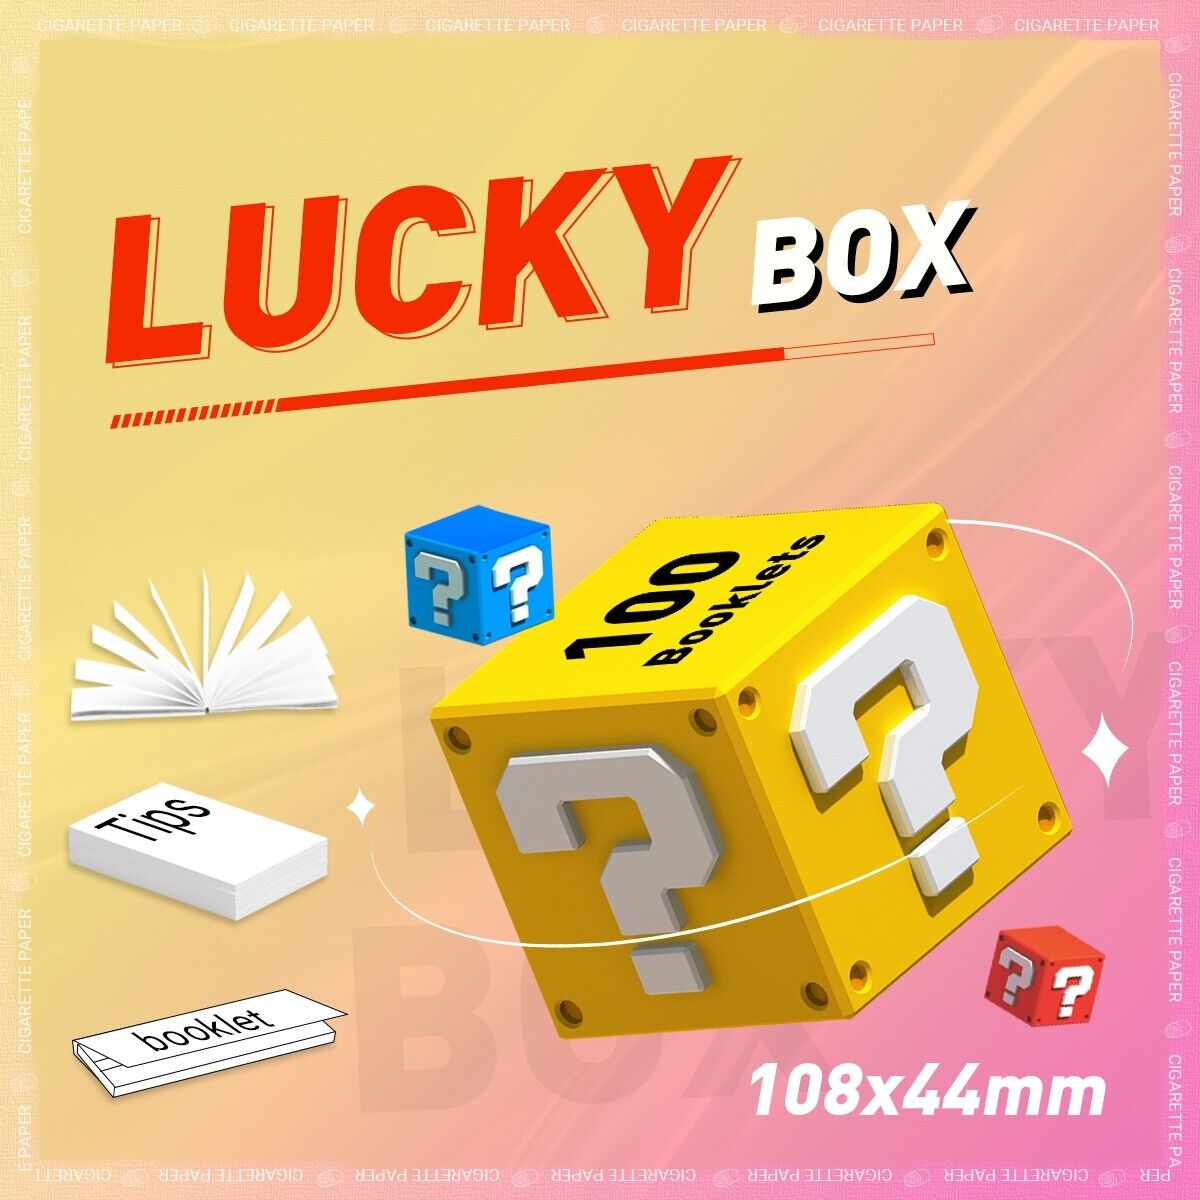 Lucky Box 100 Booklets Rolling Paper King Size 108x44mm Random Pack